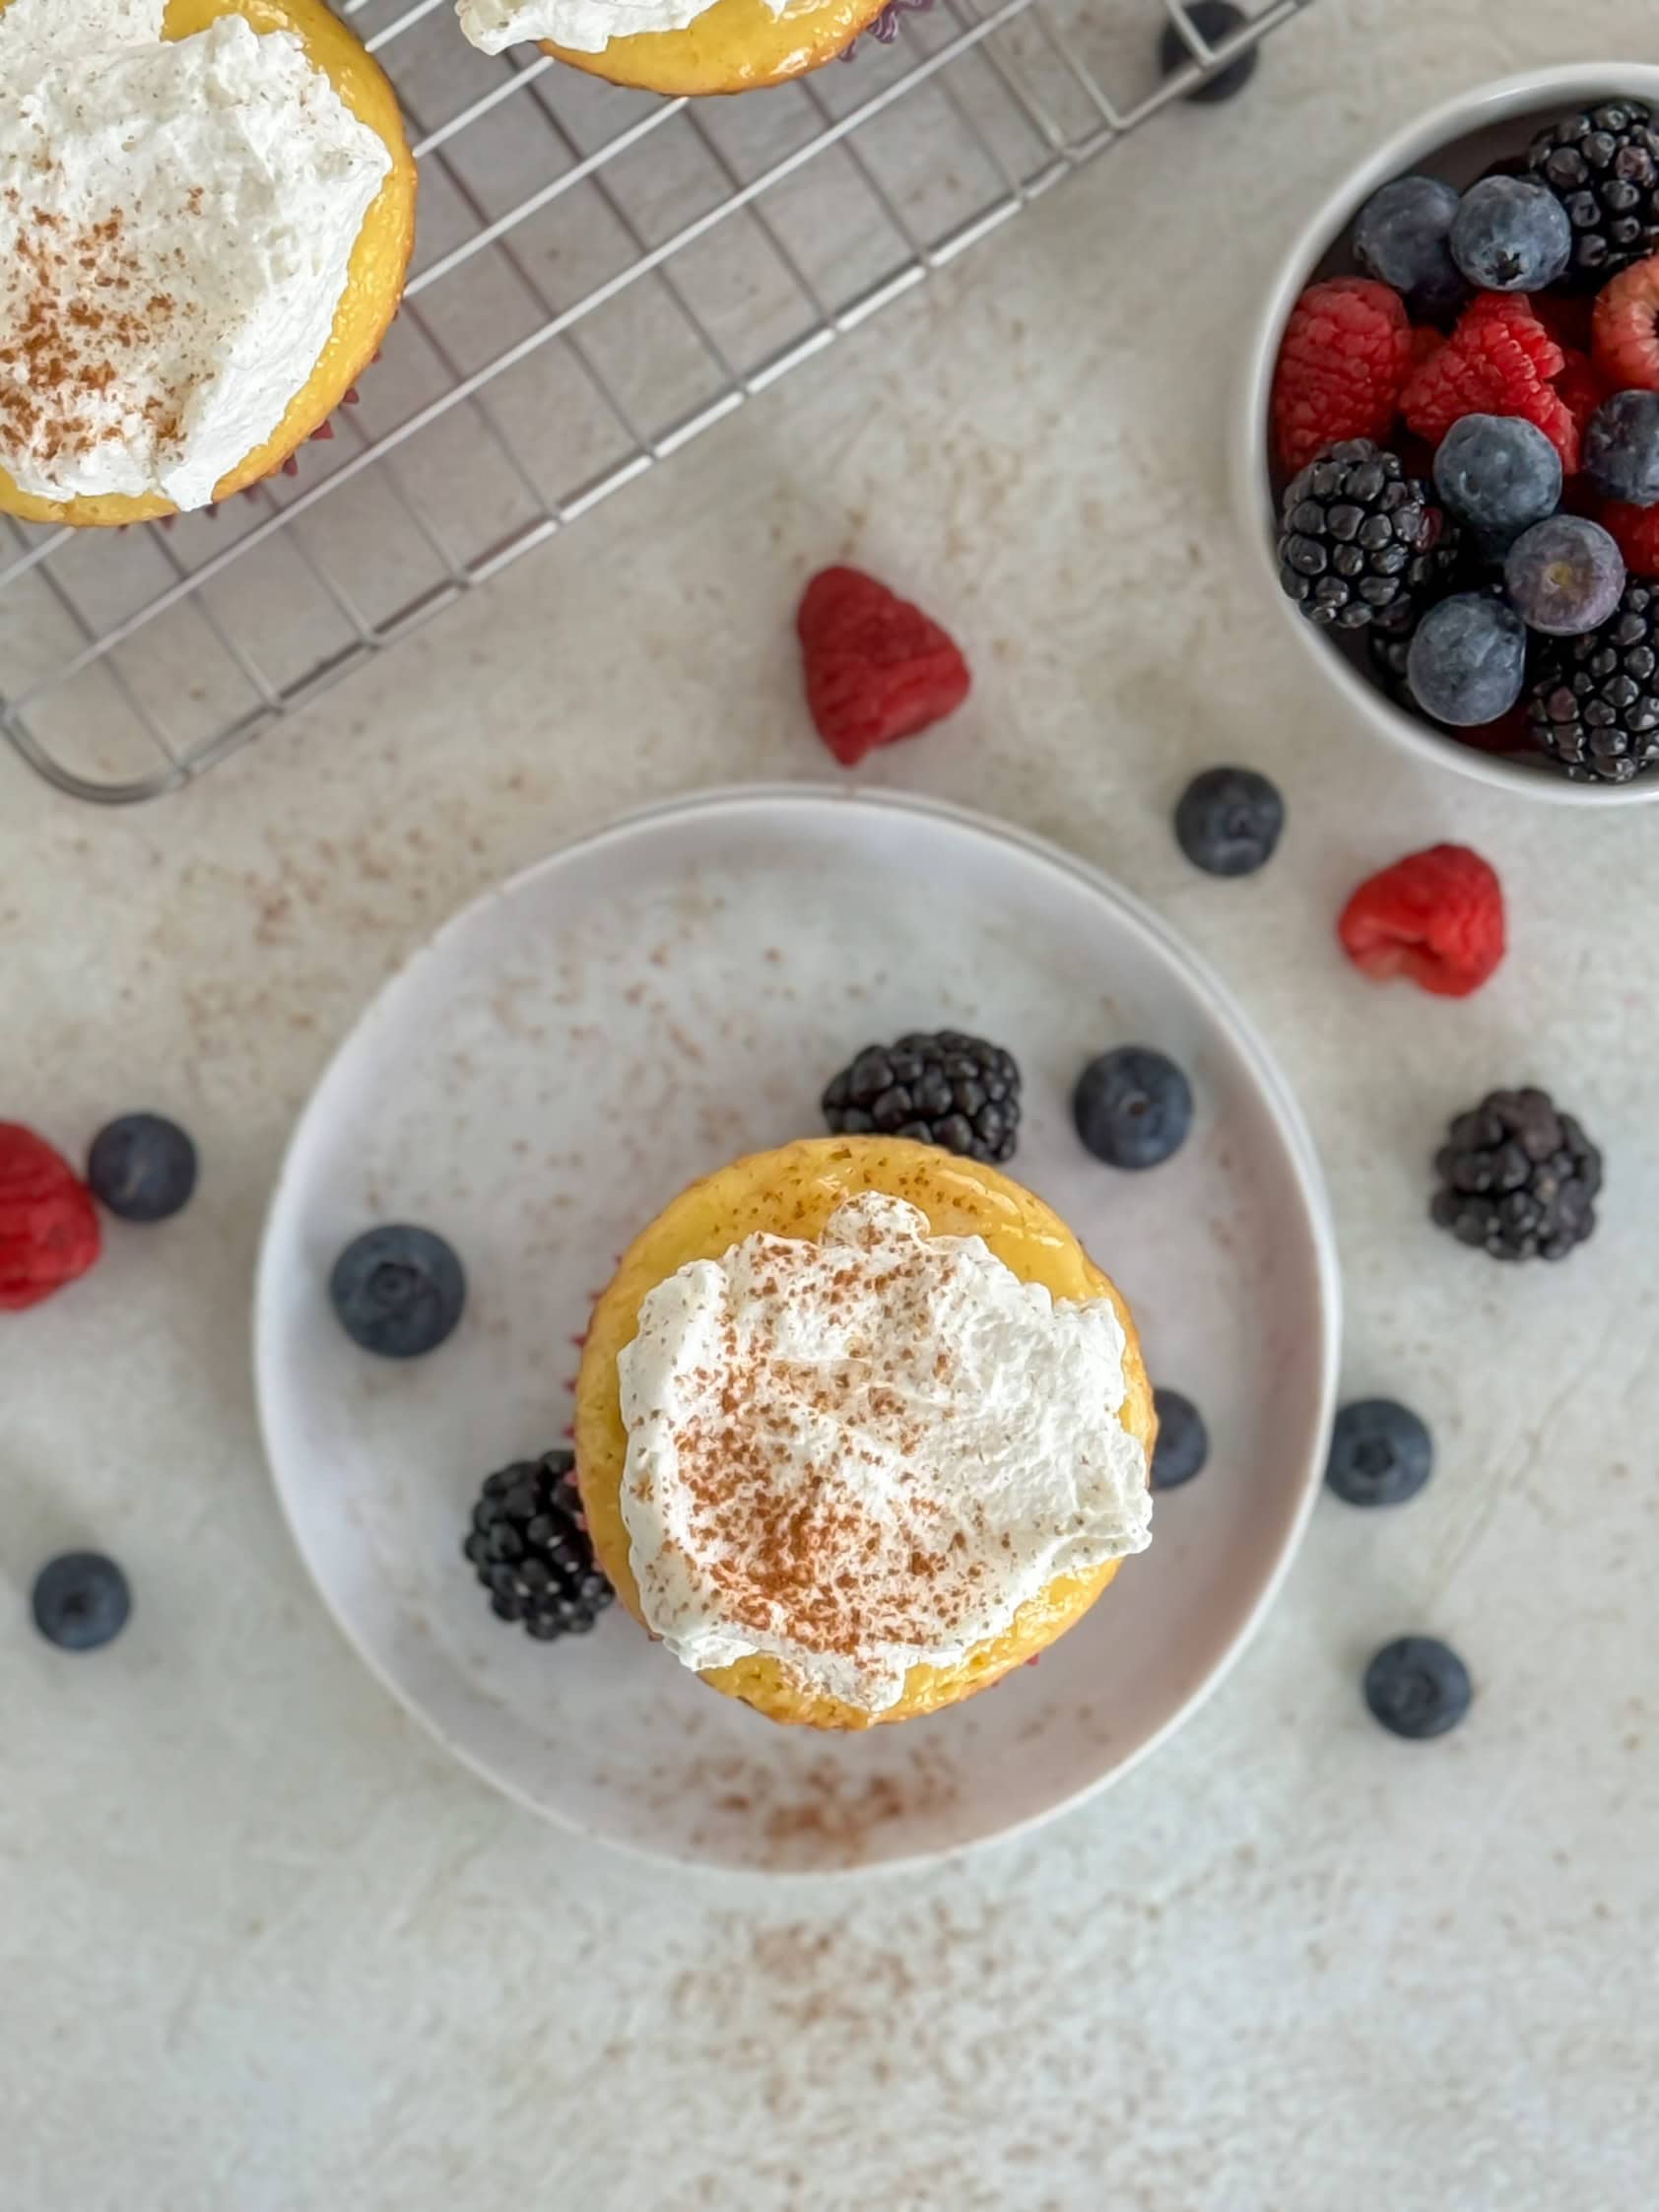 An overhead shot of a cupcake topped with whipped cream and a dusting of cinnamon on a white plate, surrounded by scattered fresh berries.